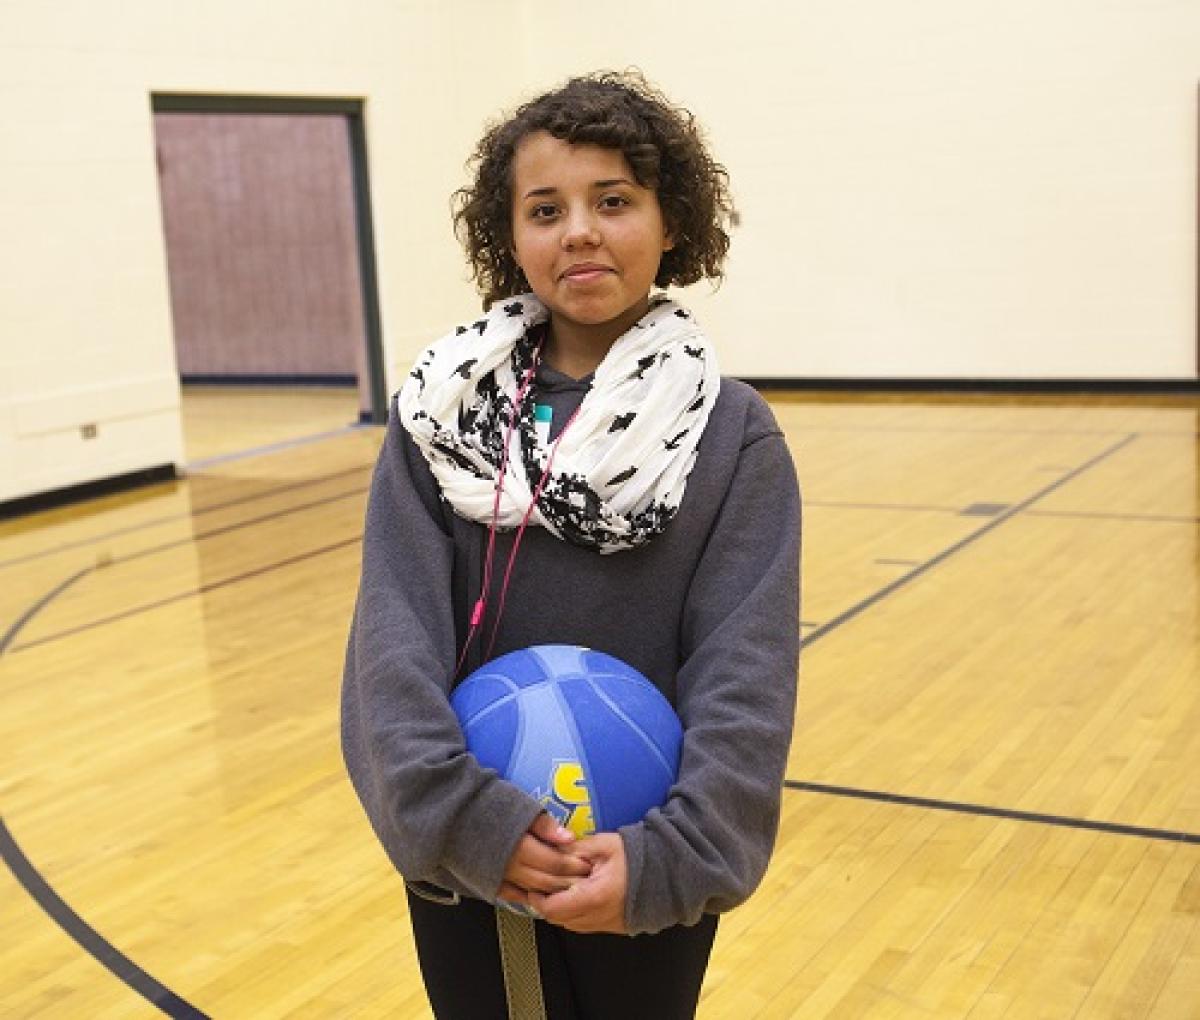 Middle-school girl poses with basketball on the court